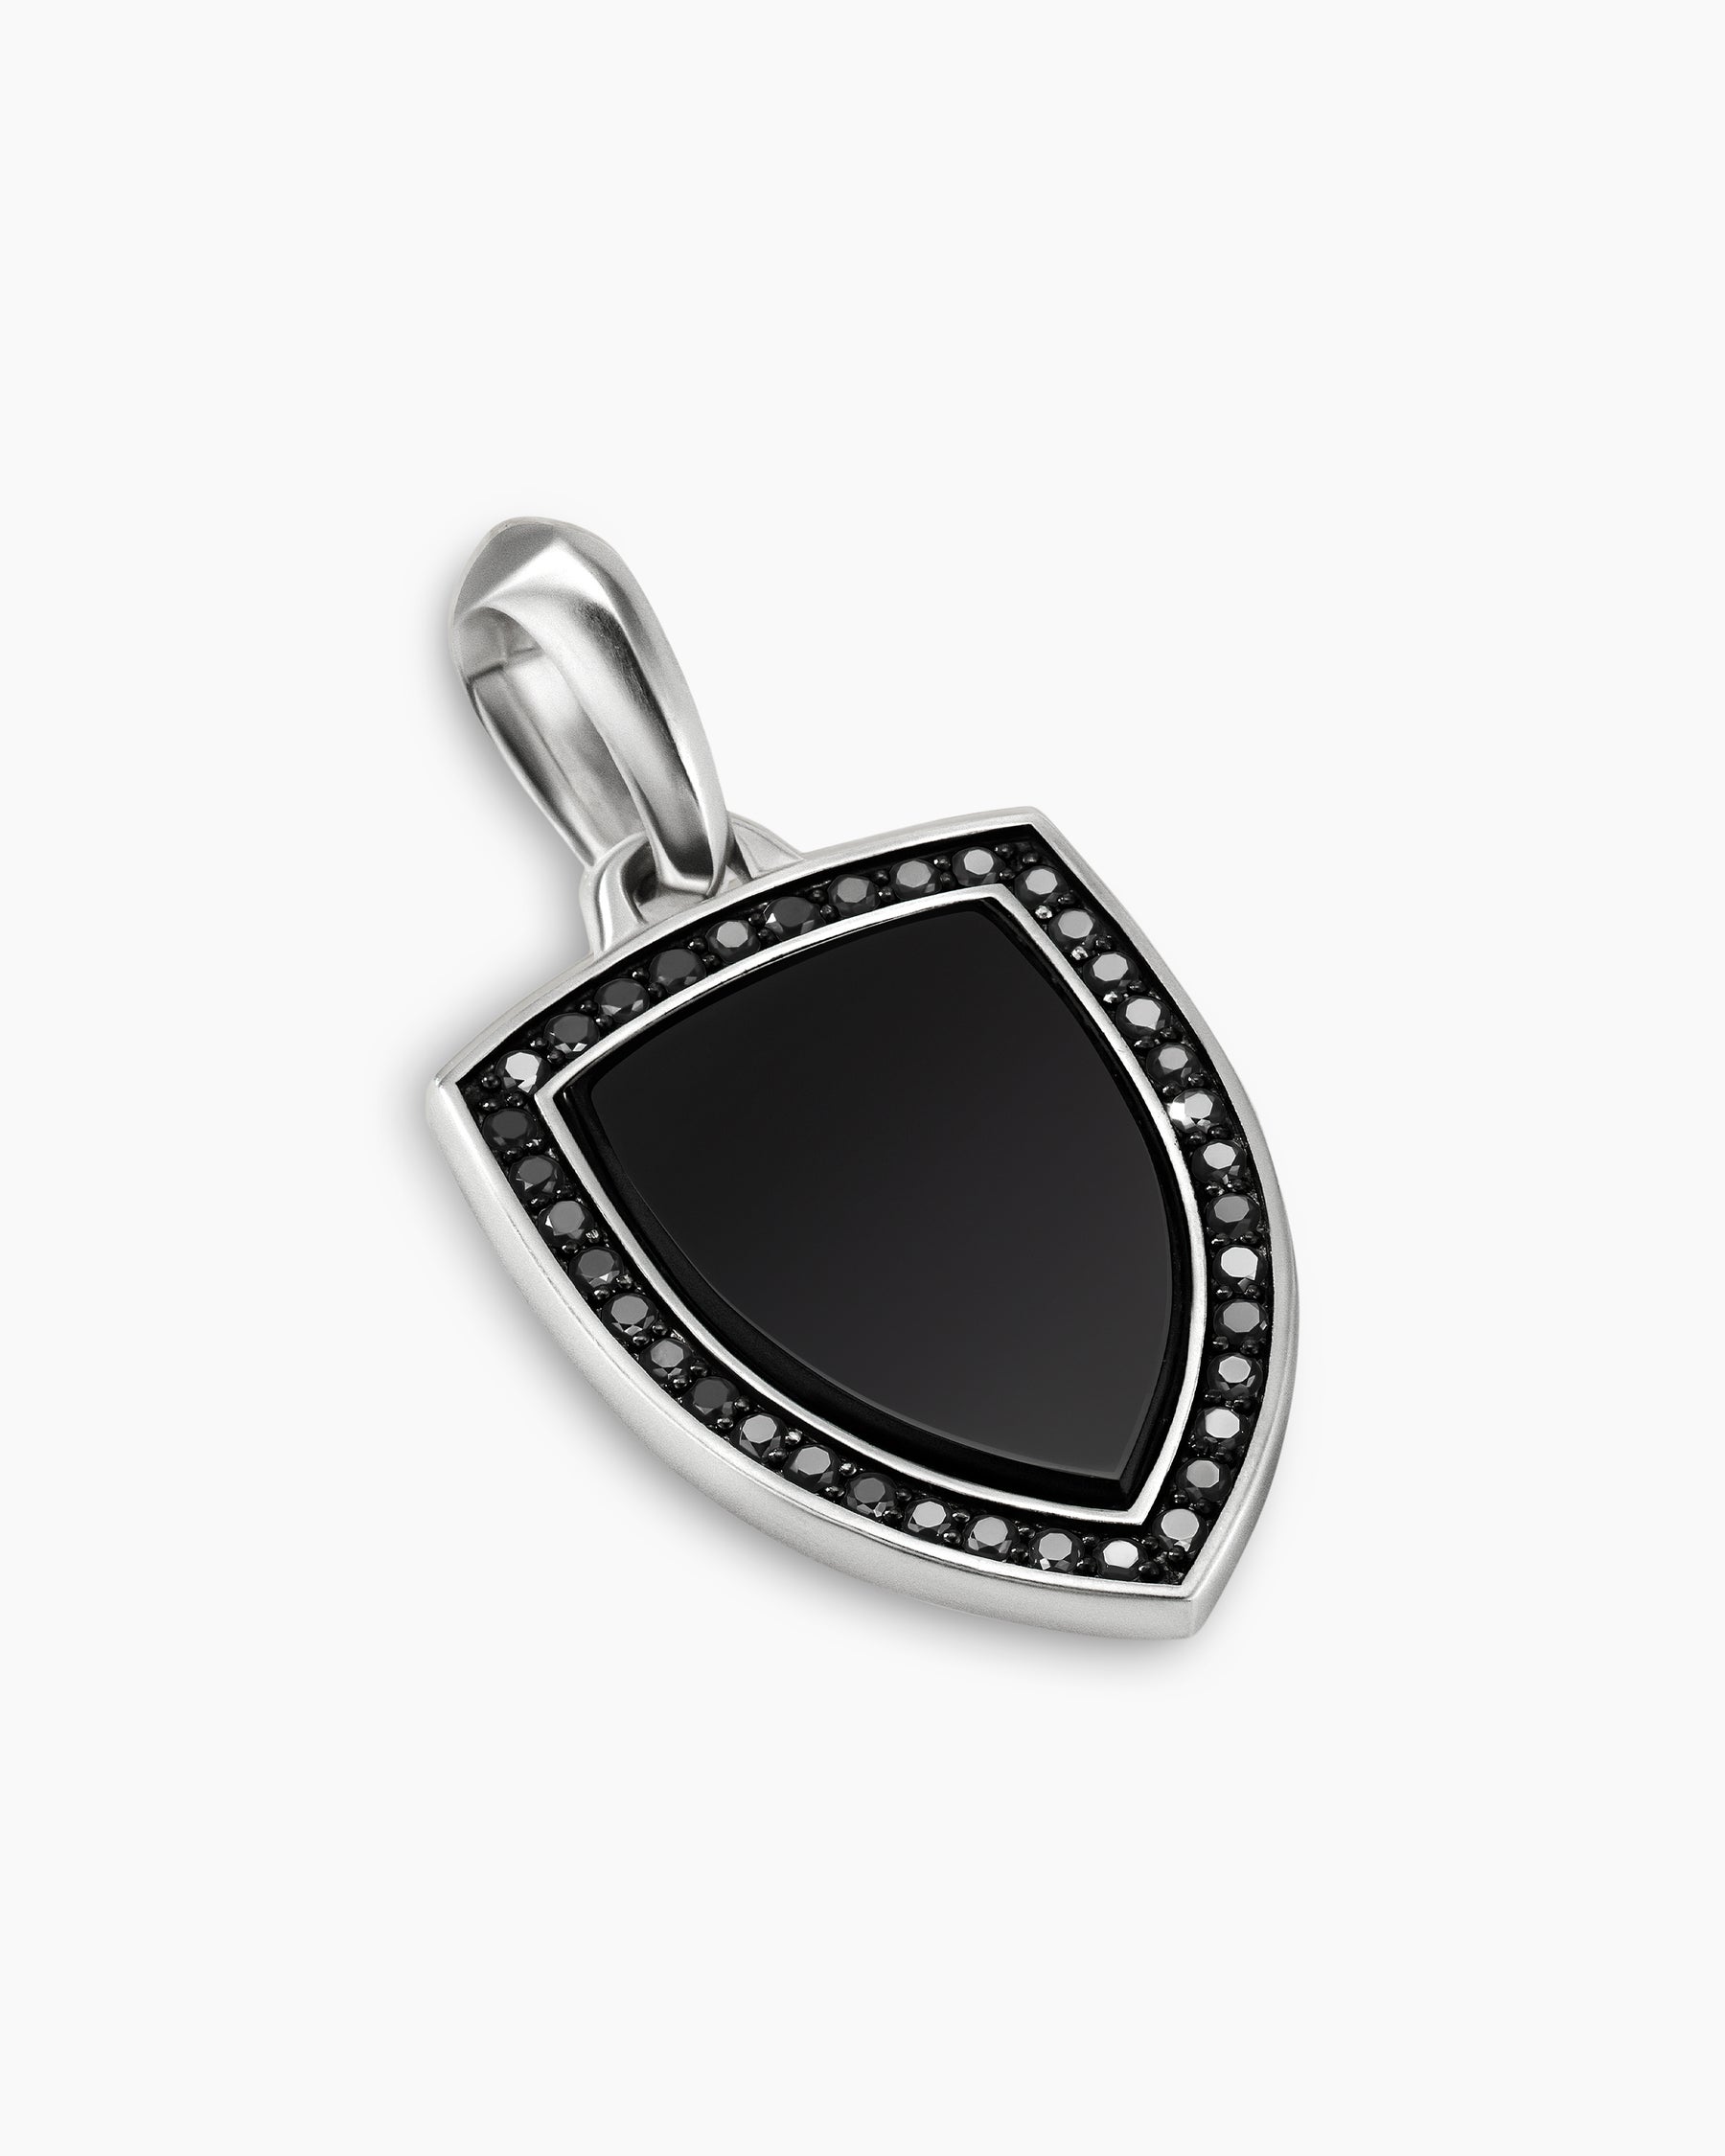 Shield Amulet in Sterling Silver with Black Onyx and Black Diamonds, 27mm |  David Yurman